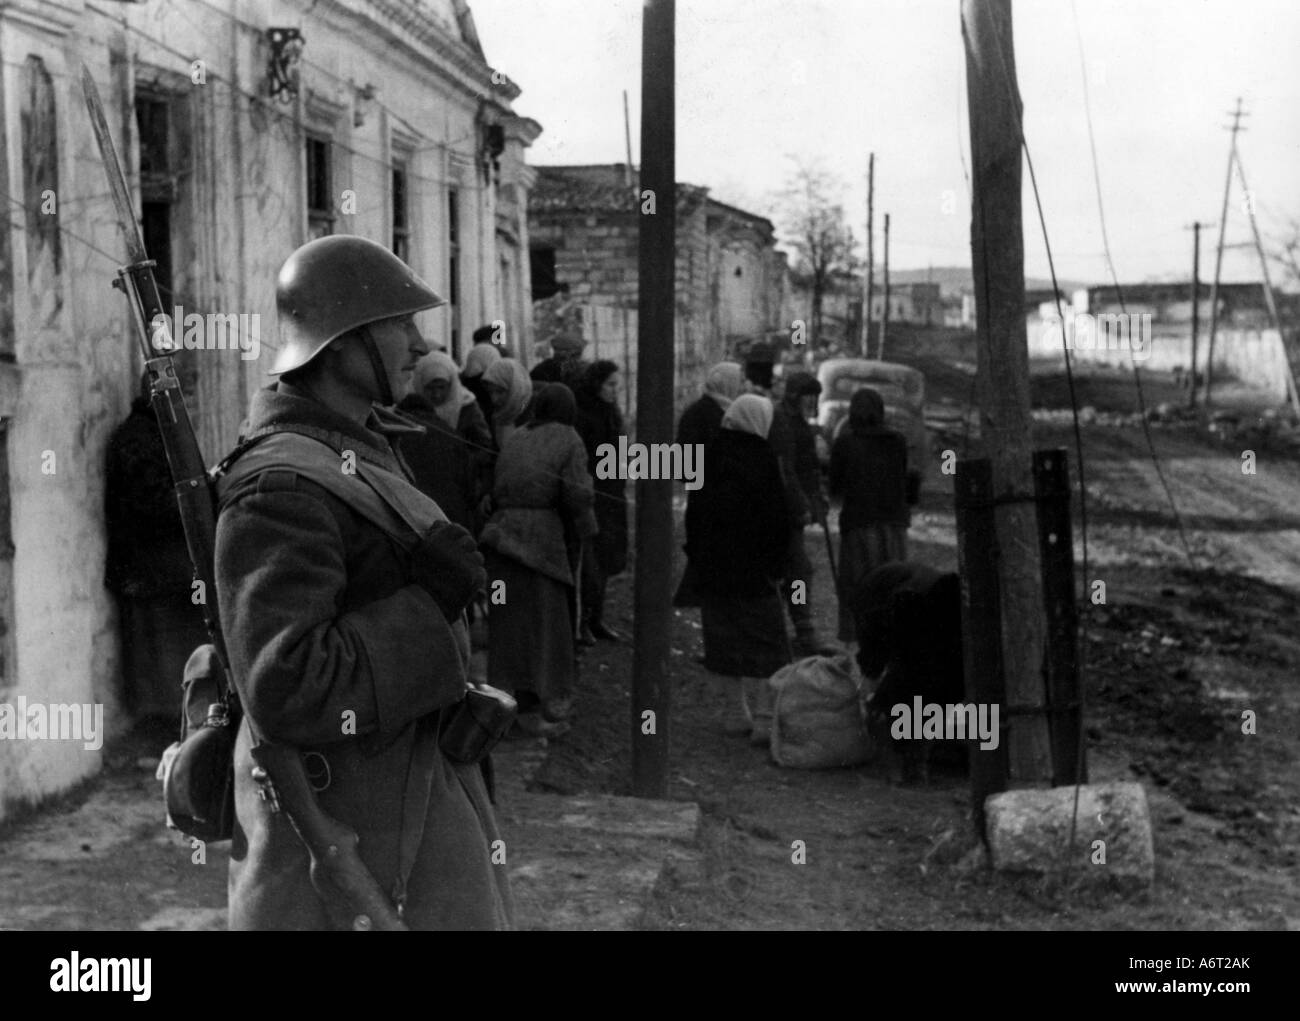 events, Second World War / WWII, Russia 1942 / 1943, Crimea, Ukraine, Romanian sentry in Kerch, 10.10.1943, USSR, military, Axis forces, Romania, Rumania, Rumanian, infantry, soldiers, 20th century, historic, historical, Soviet Union, Eastern Front, people, 1940s, Stock Photo